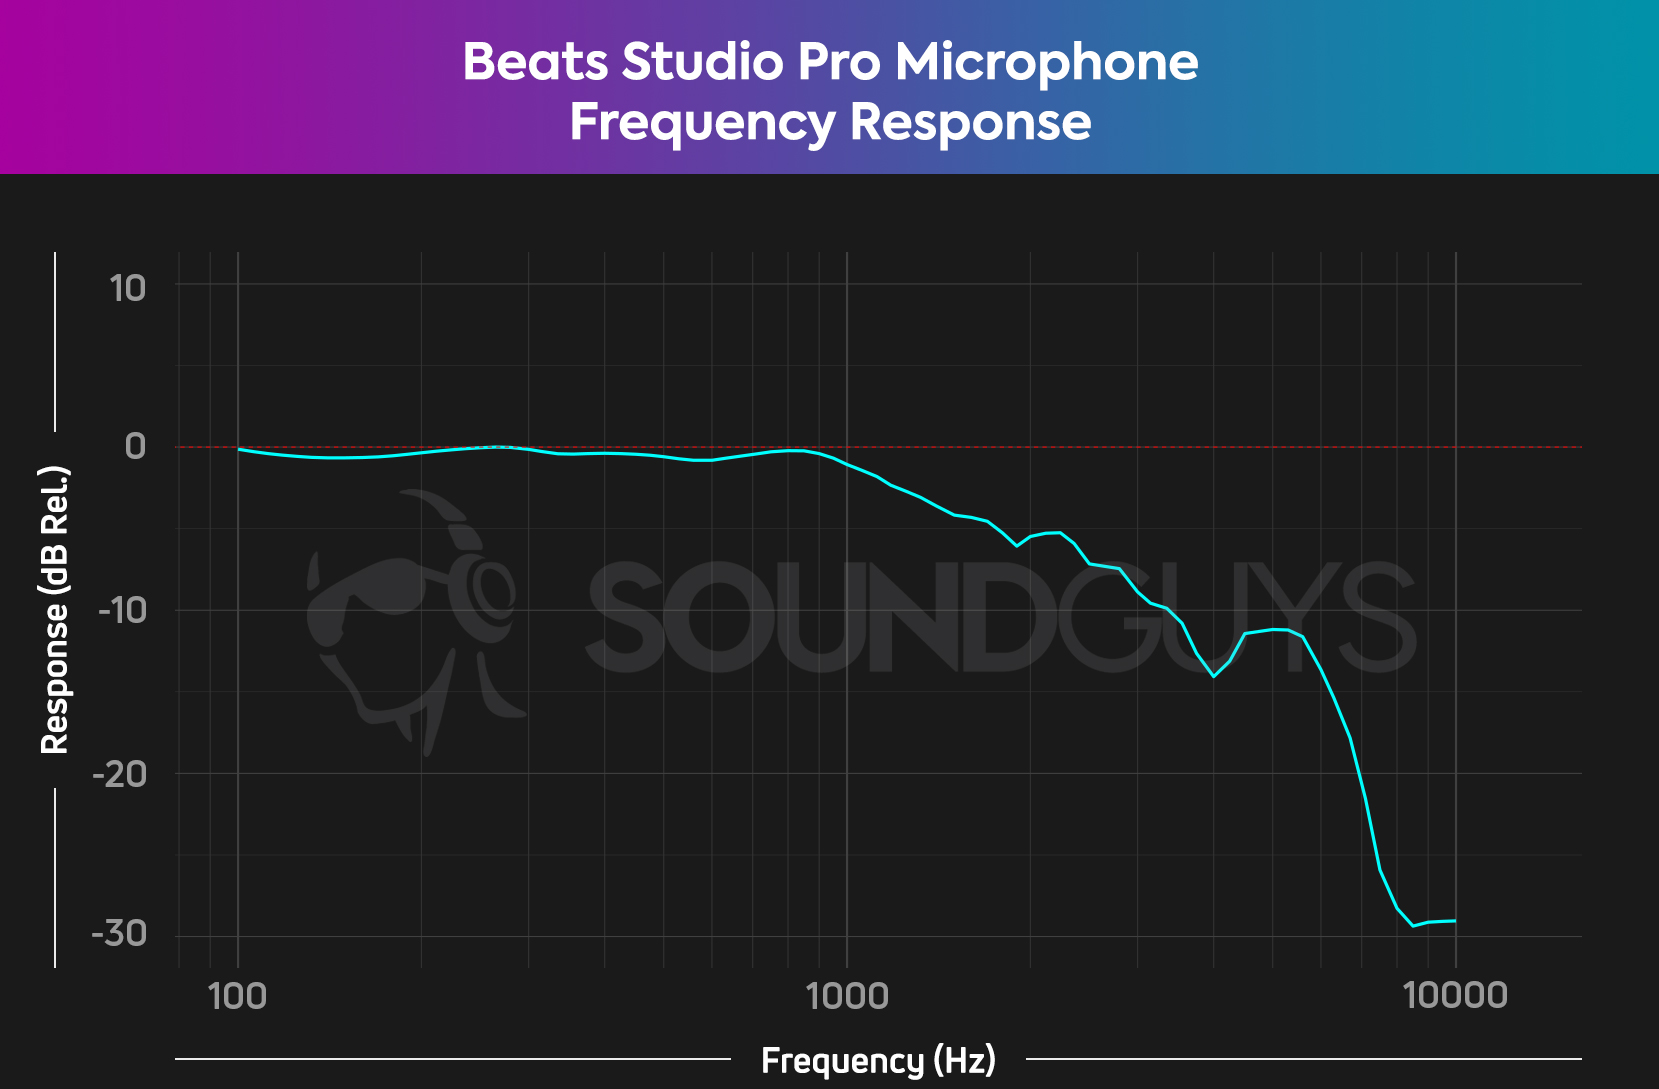 A chart showing the frequency response of the Beats Studio Pro's microphone.